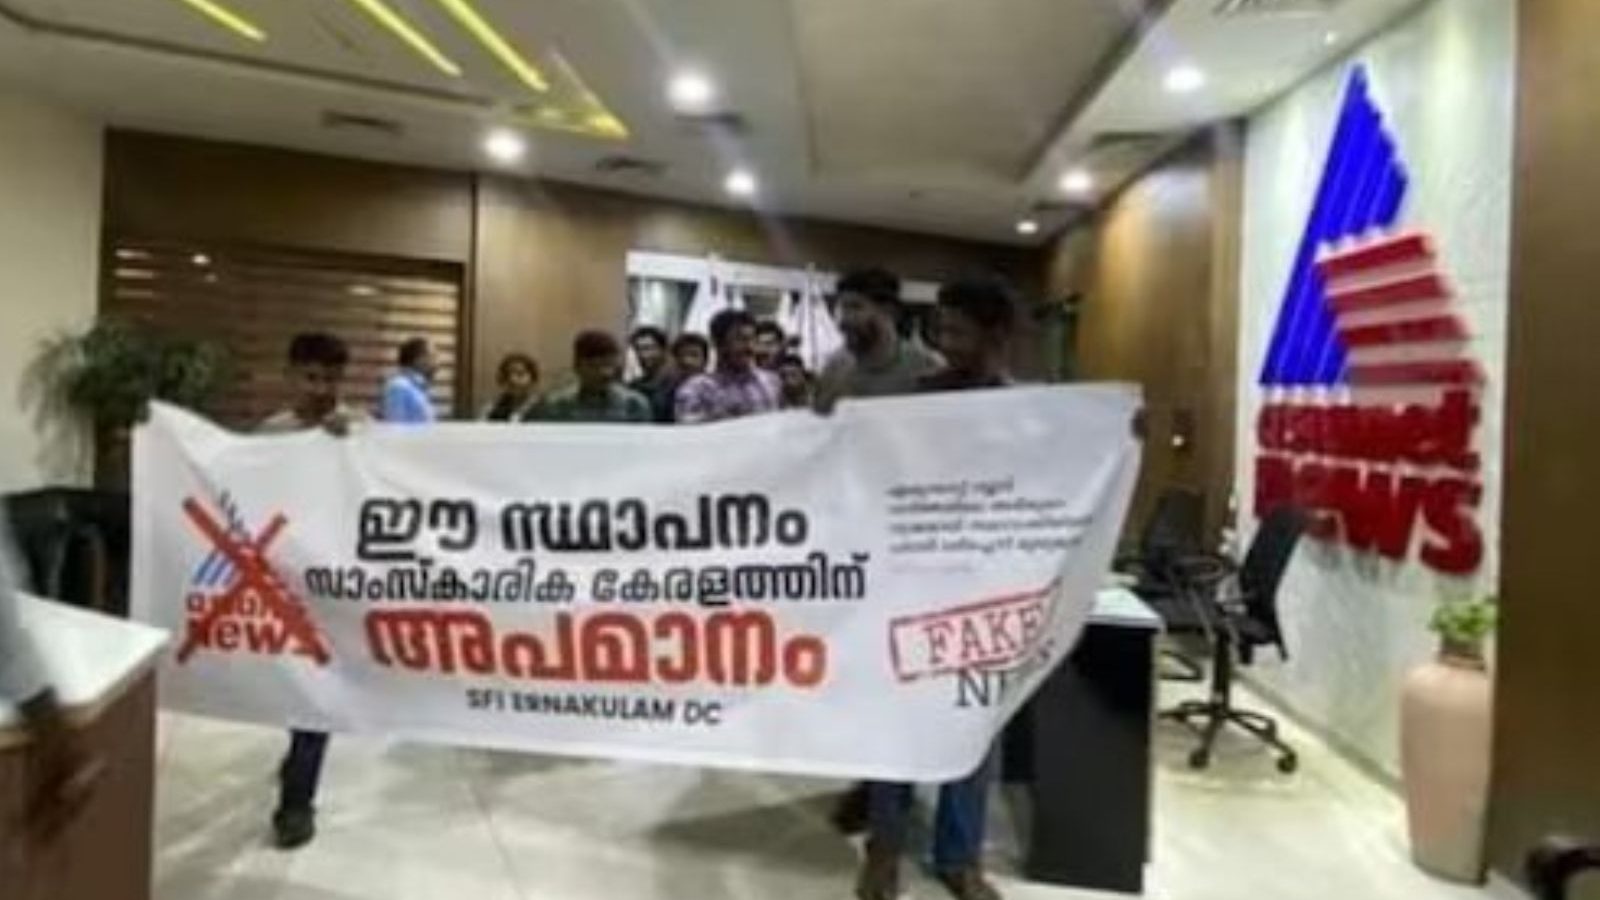 Asianet Channel Under Scrutiny as Cops Search Kochi Office Amidst Claims of ‘Fake News’ by SFI Activists